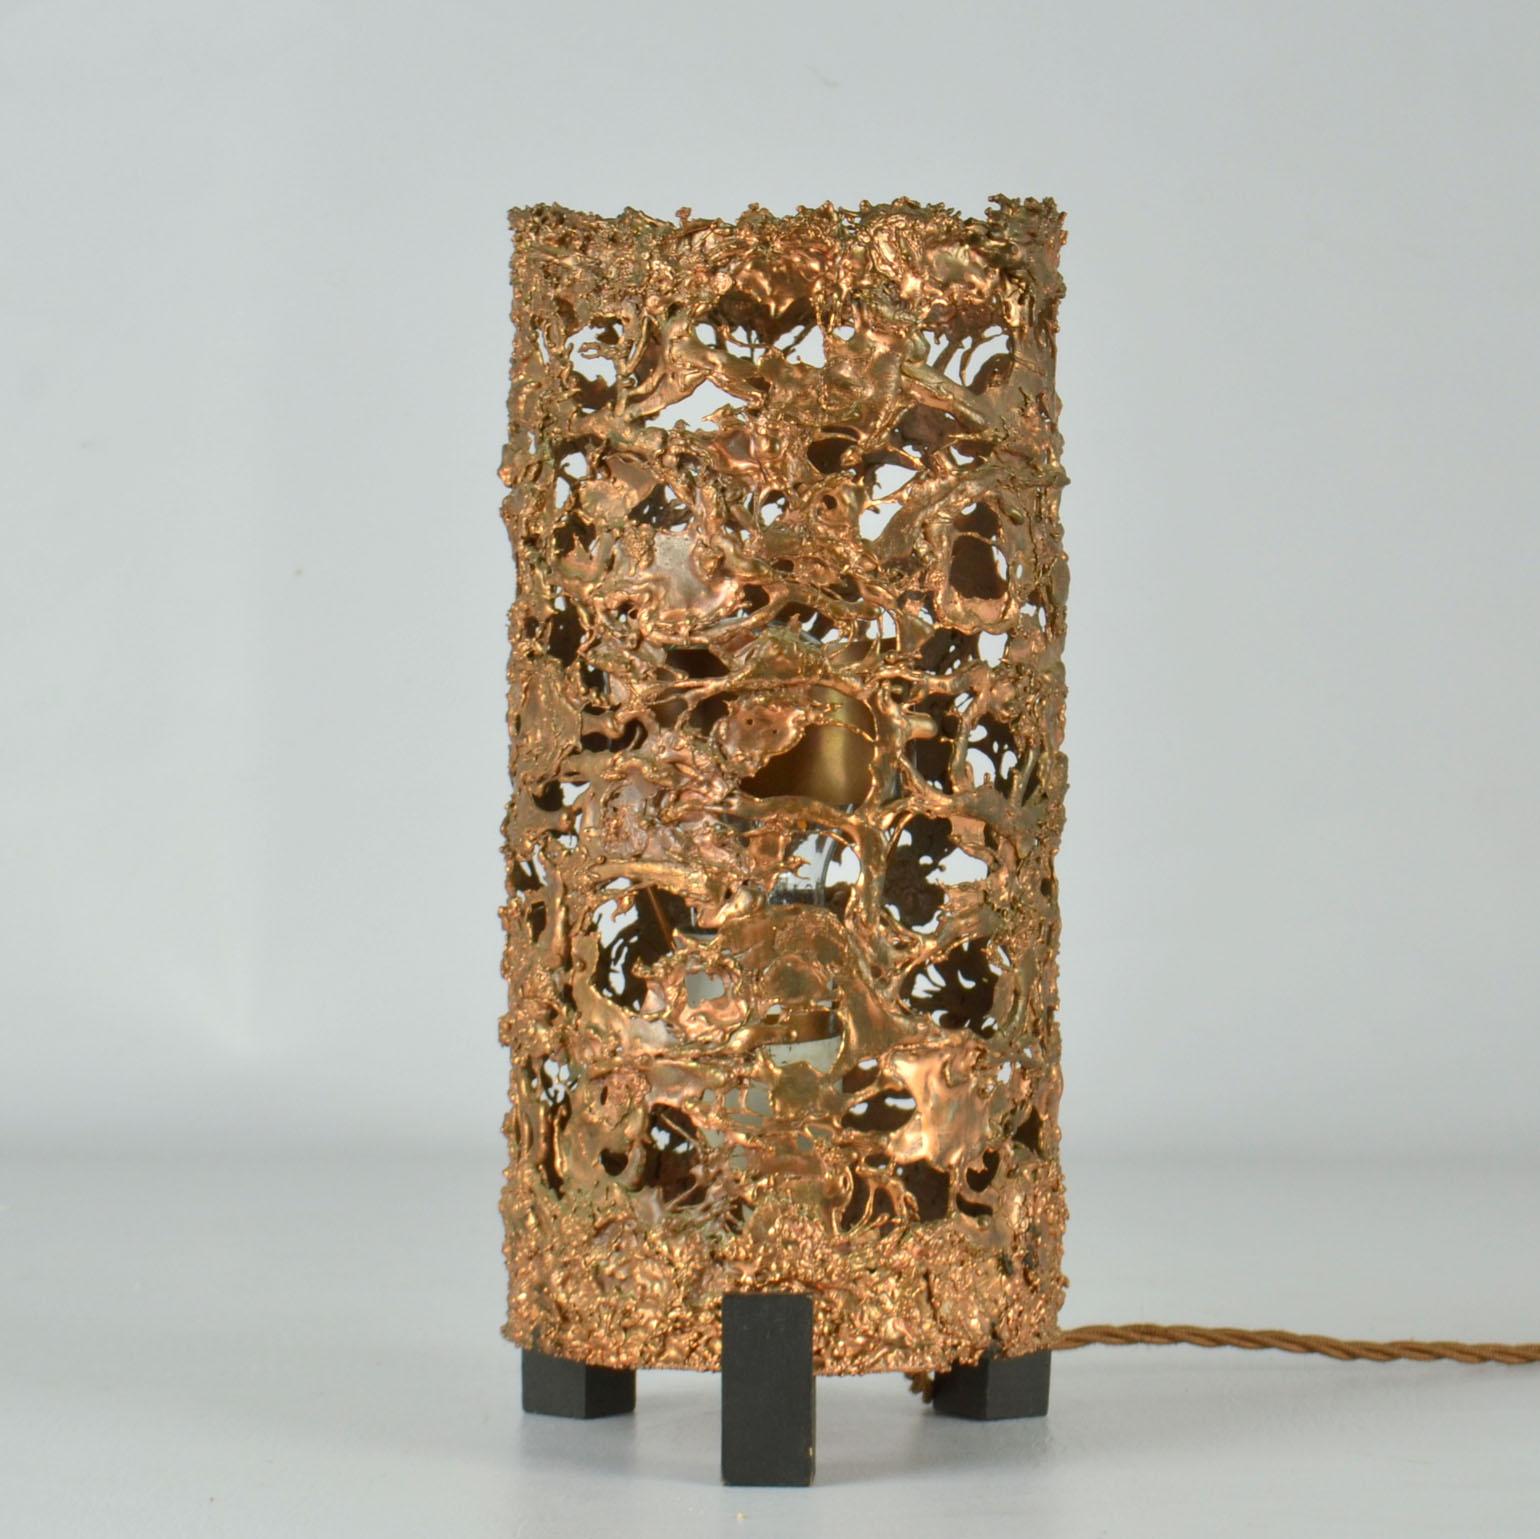 Scandinavian Modern Organic Relief Copper Table Lamp by Aimo Tukiainen Finland, 1960's For Sale